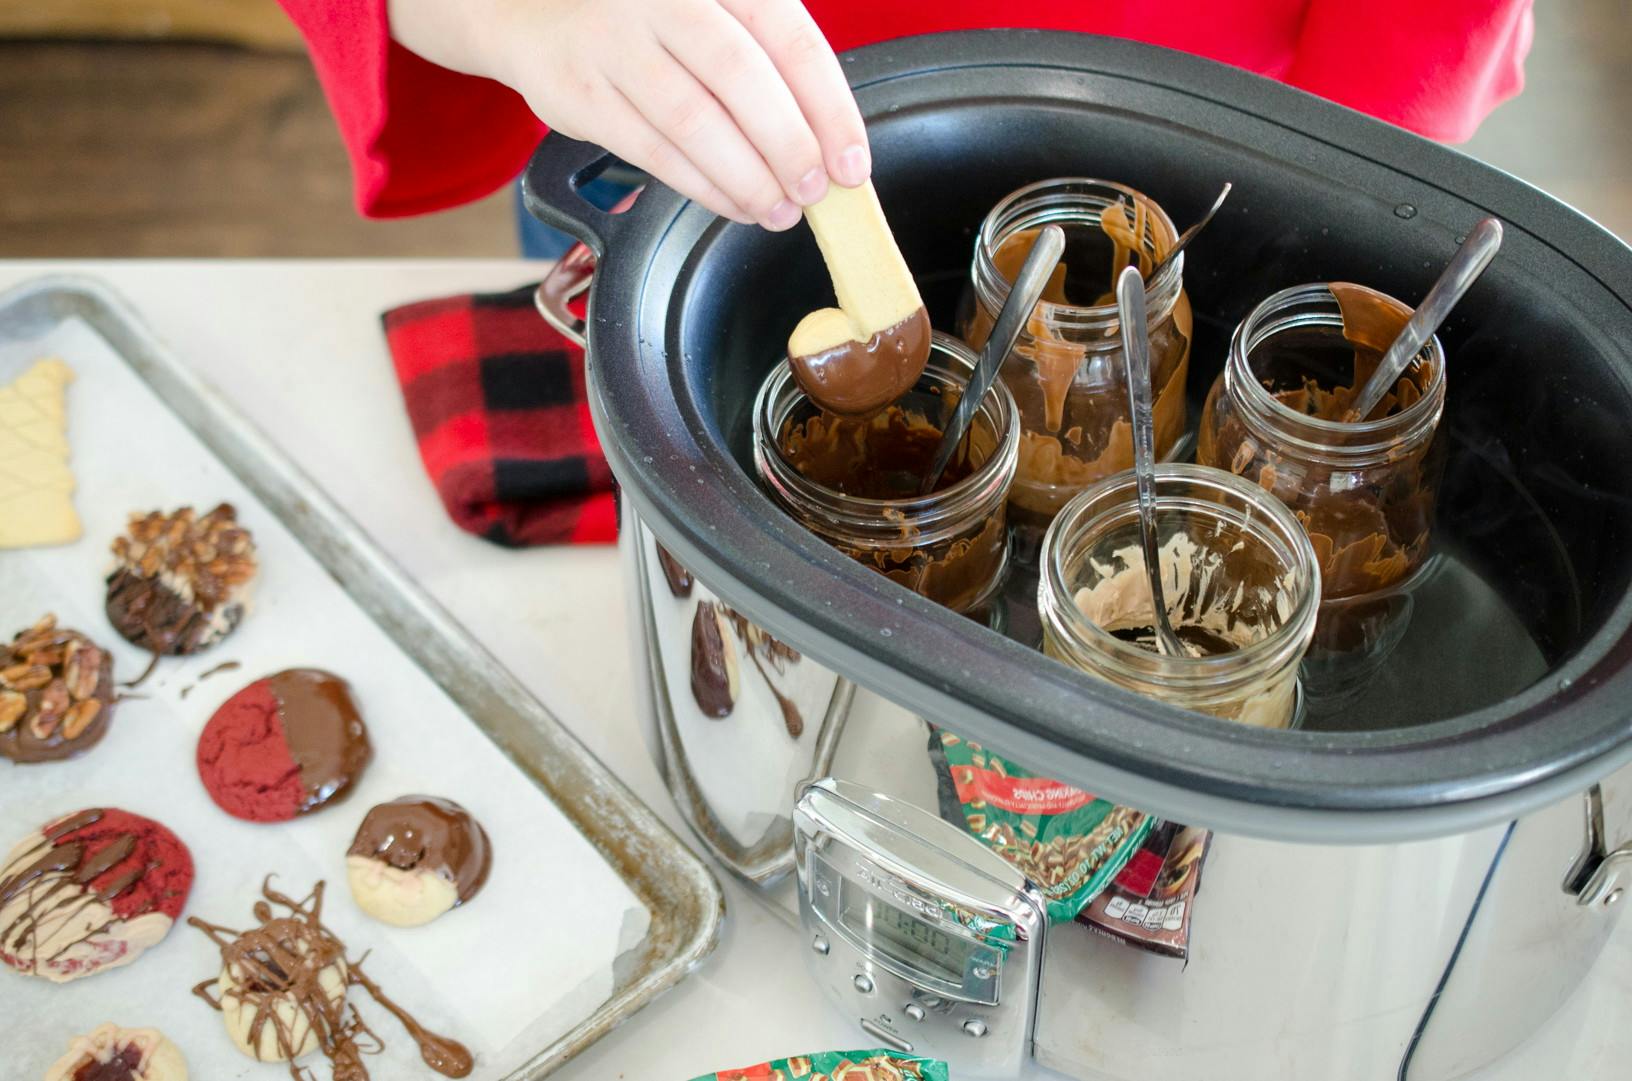 A person dipping a Christmas cookie in Chocolate. The chocolate is melted in a mason jar, kept warm with a crock pot.